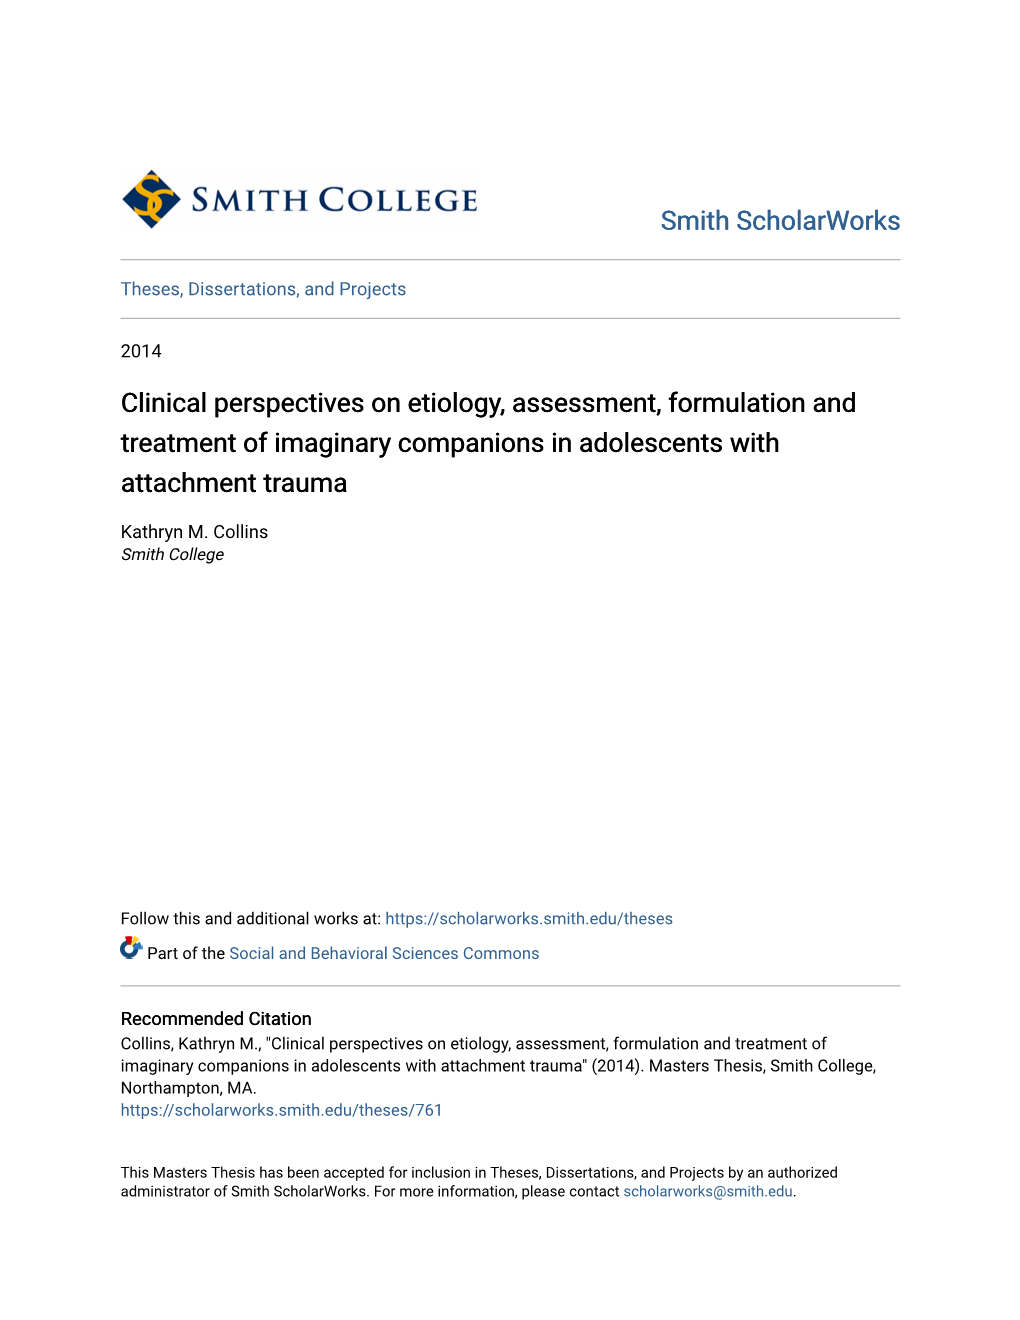 Clinical Perspectives on Etiology, Assessment, Formulation and Treatment of Imaginary Companions in Adolescents with Attachment Trauma